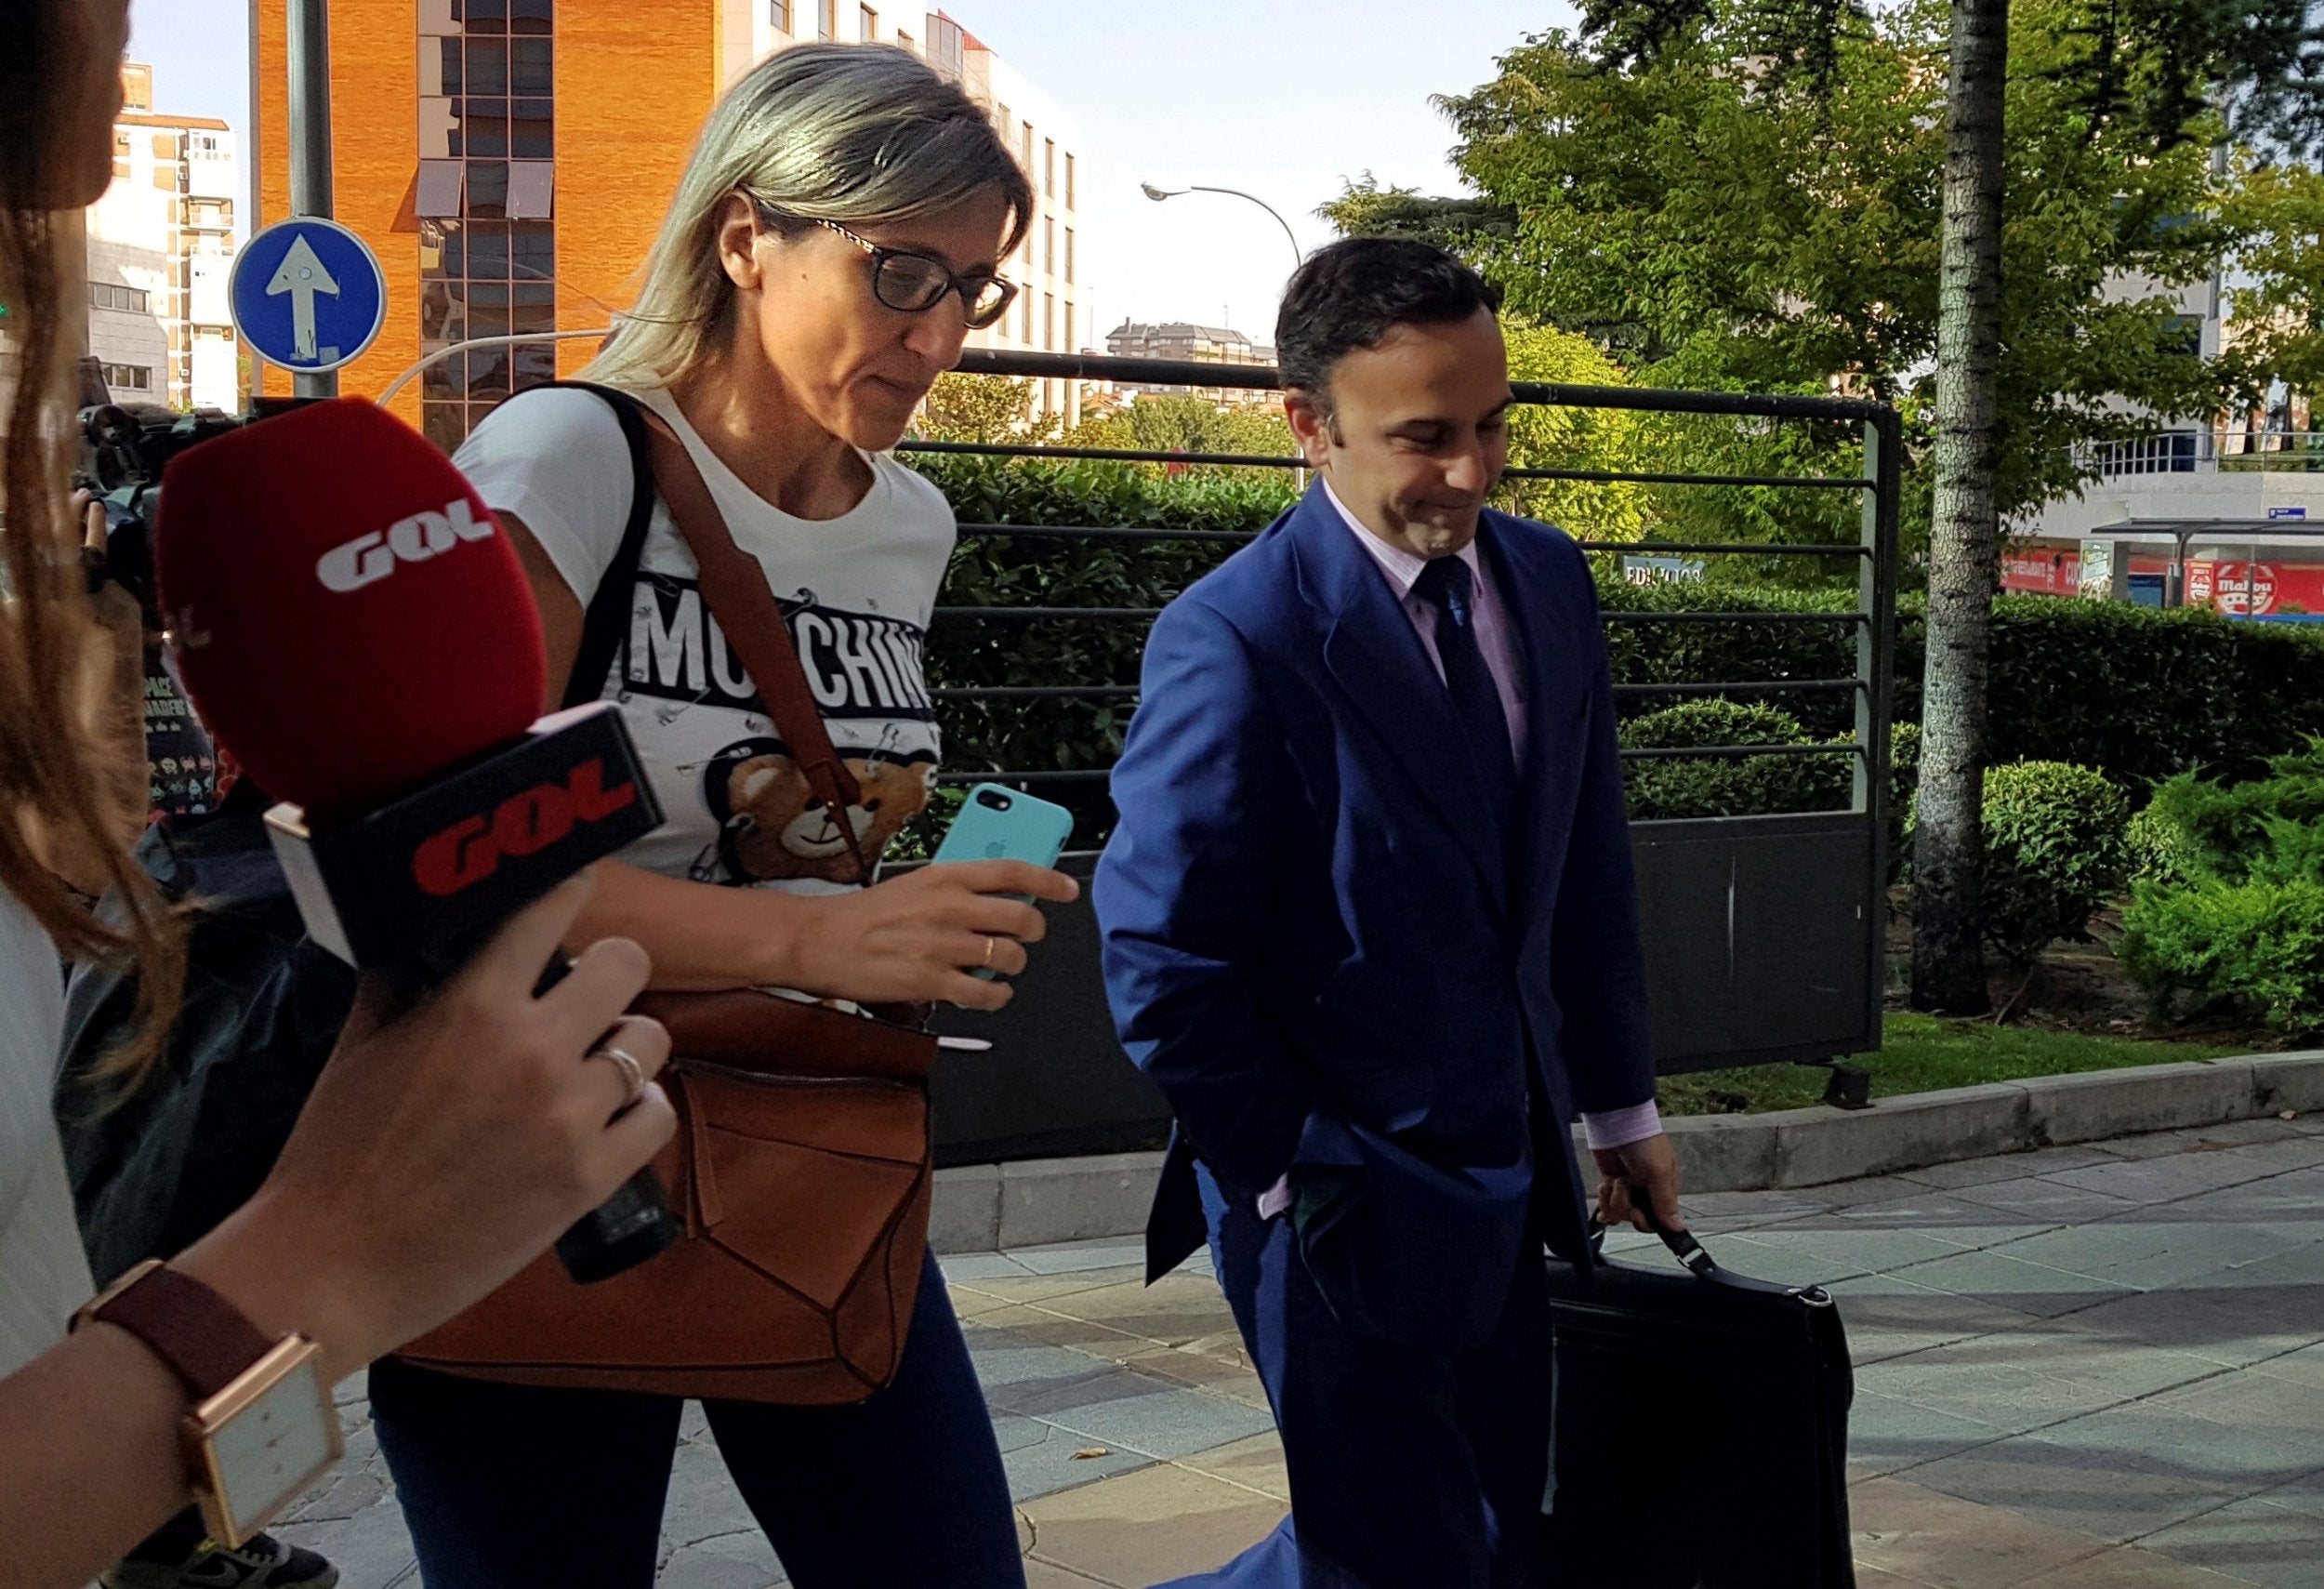 Lawyers of Kepa Arrizabalaga arrive at LaLiga headquarters to pay his release clause